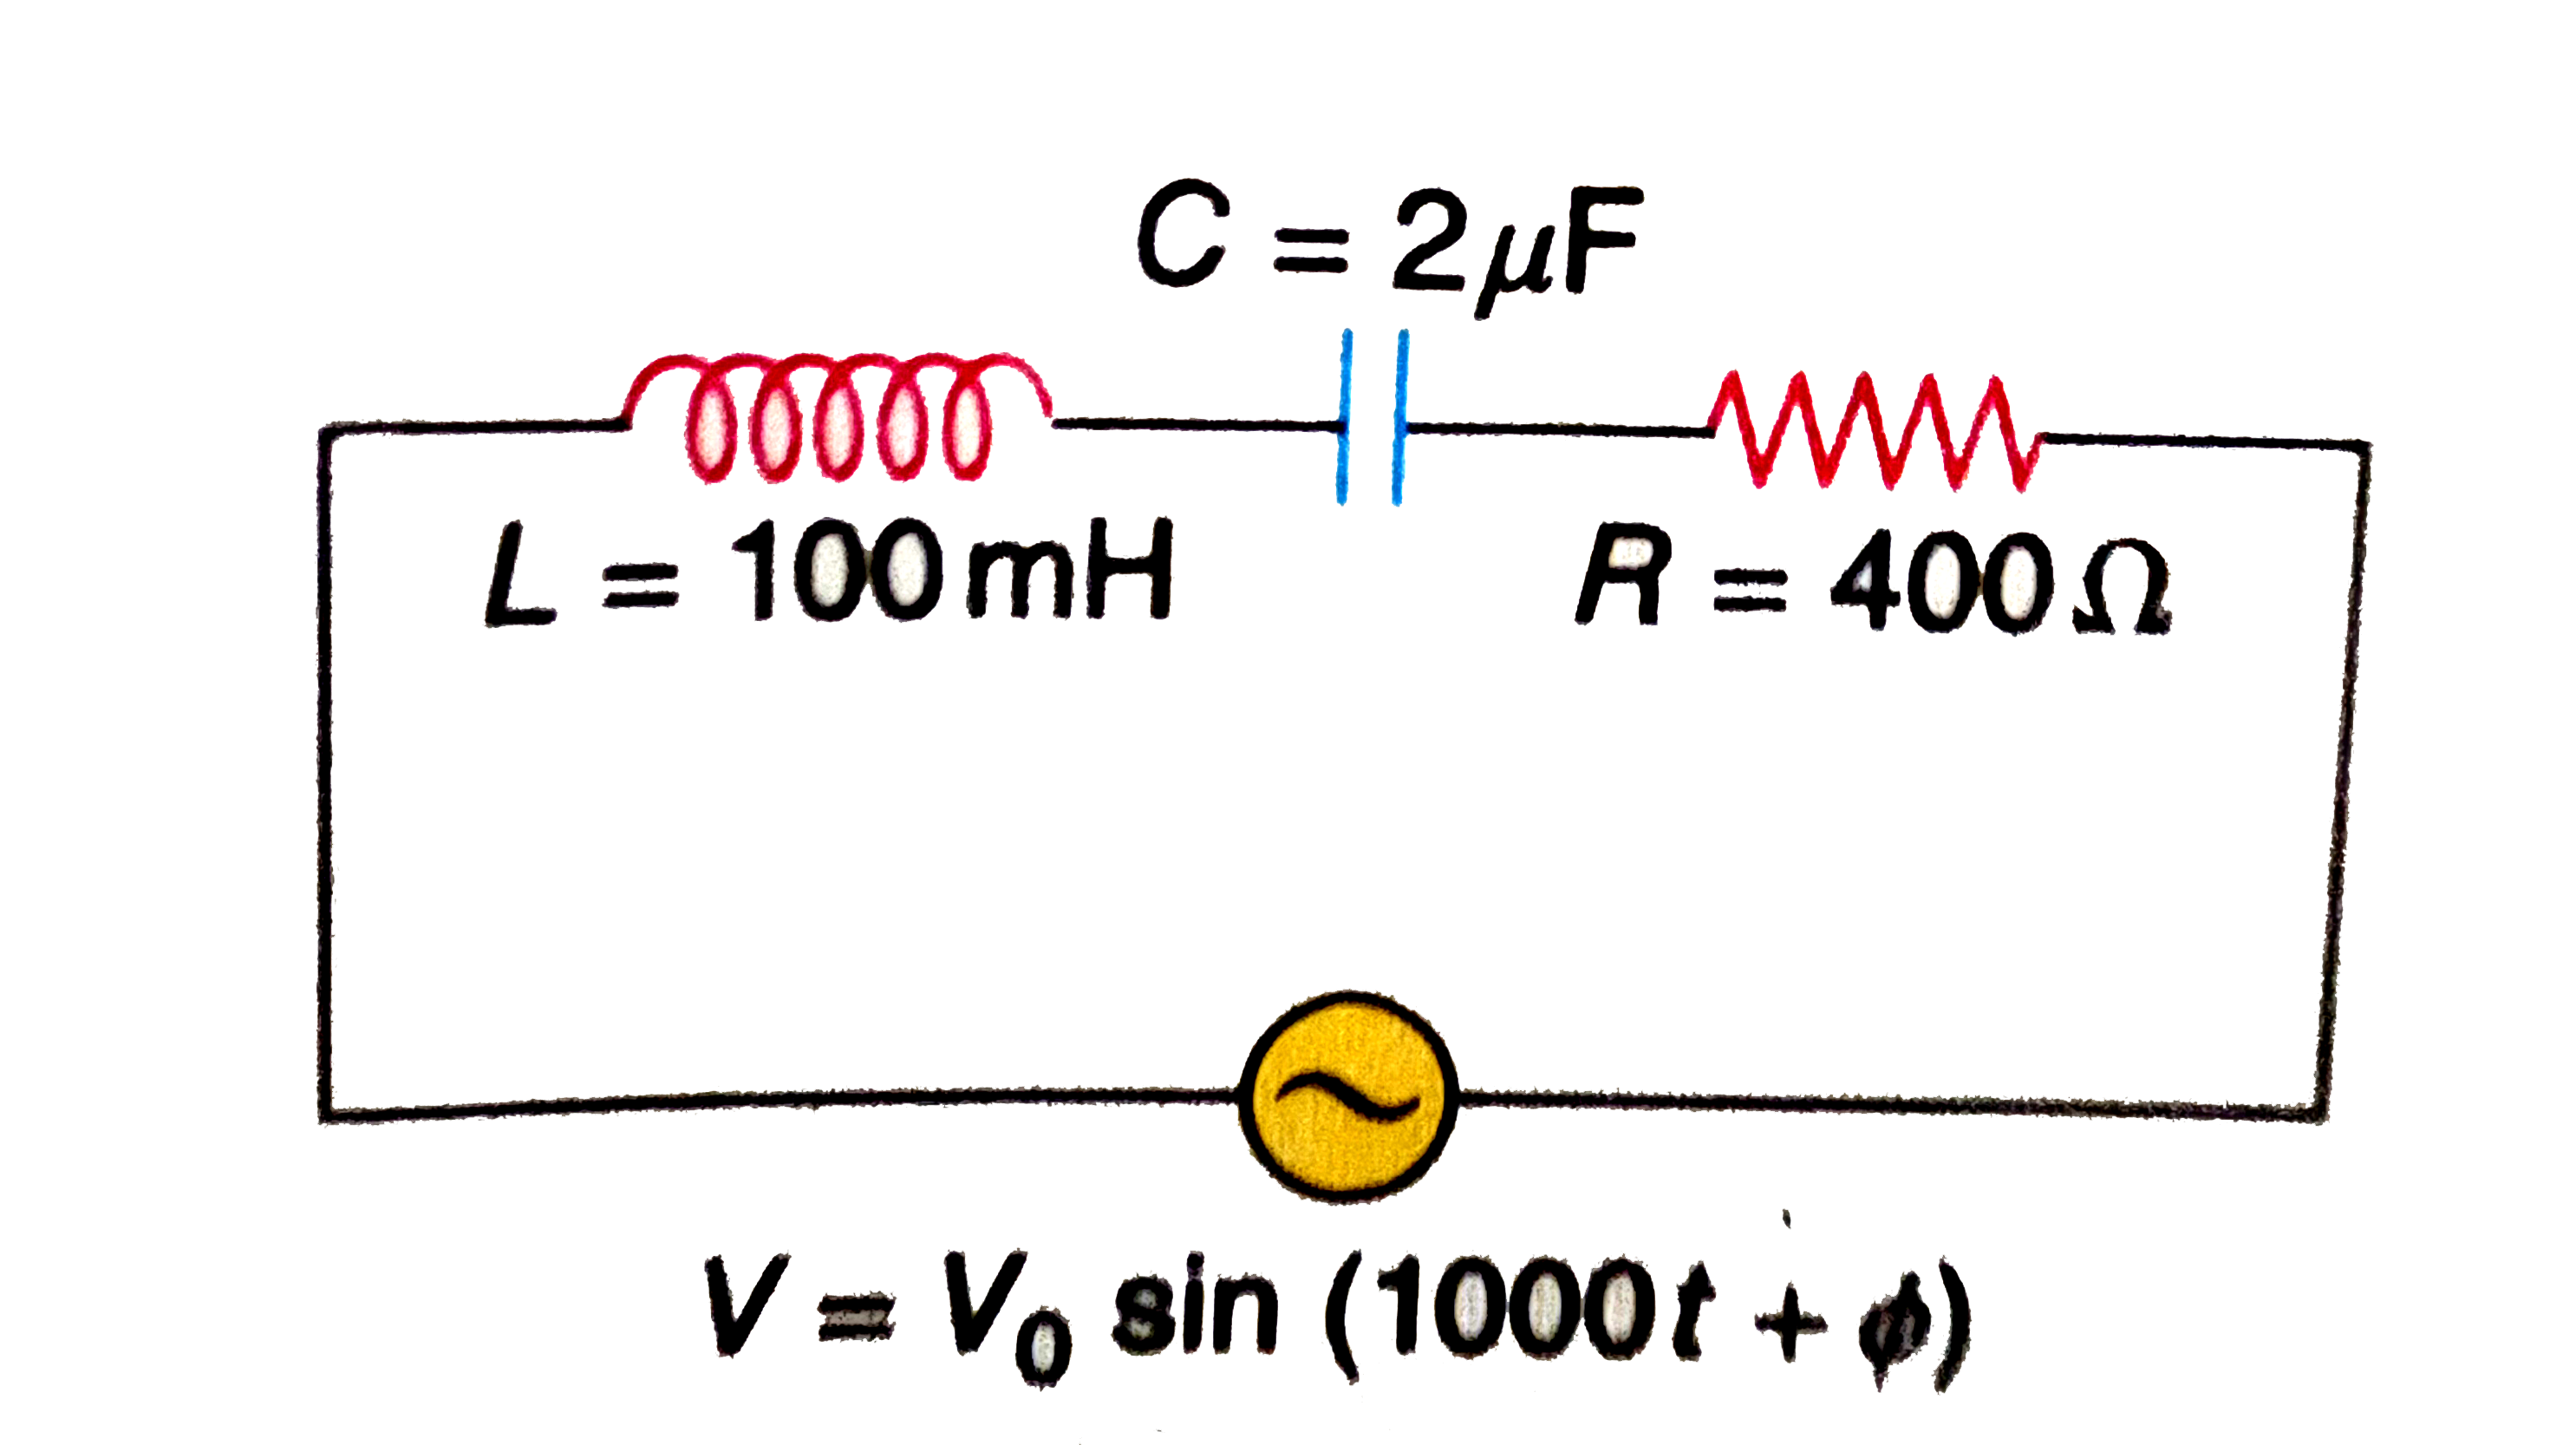 Without making any other change, find the value of the additional capacitor C1, to be connected in parallel with the capacitor C, in order to make the power factor of the circuit unity.